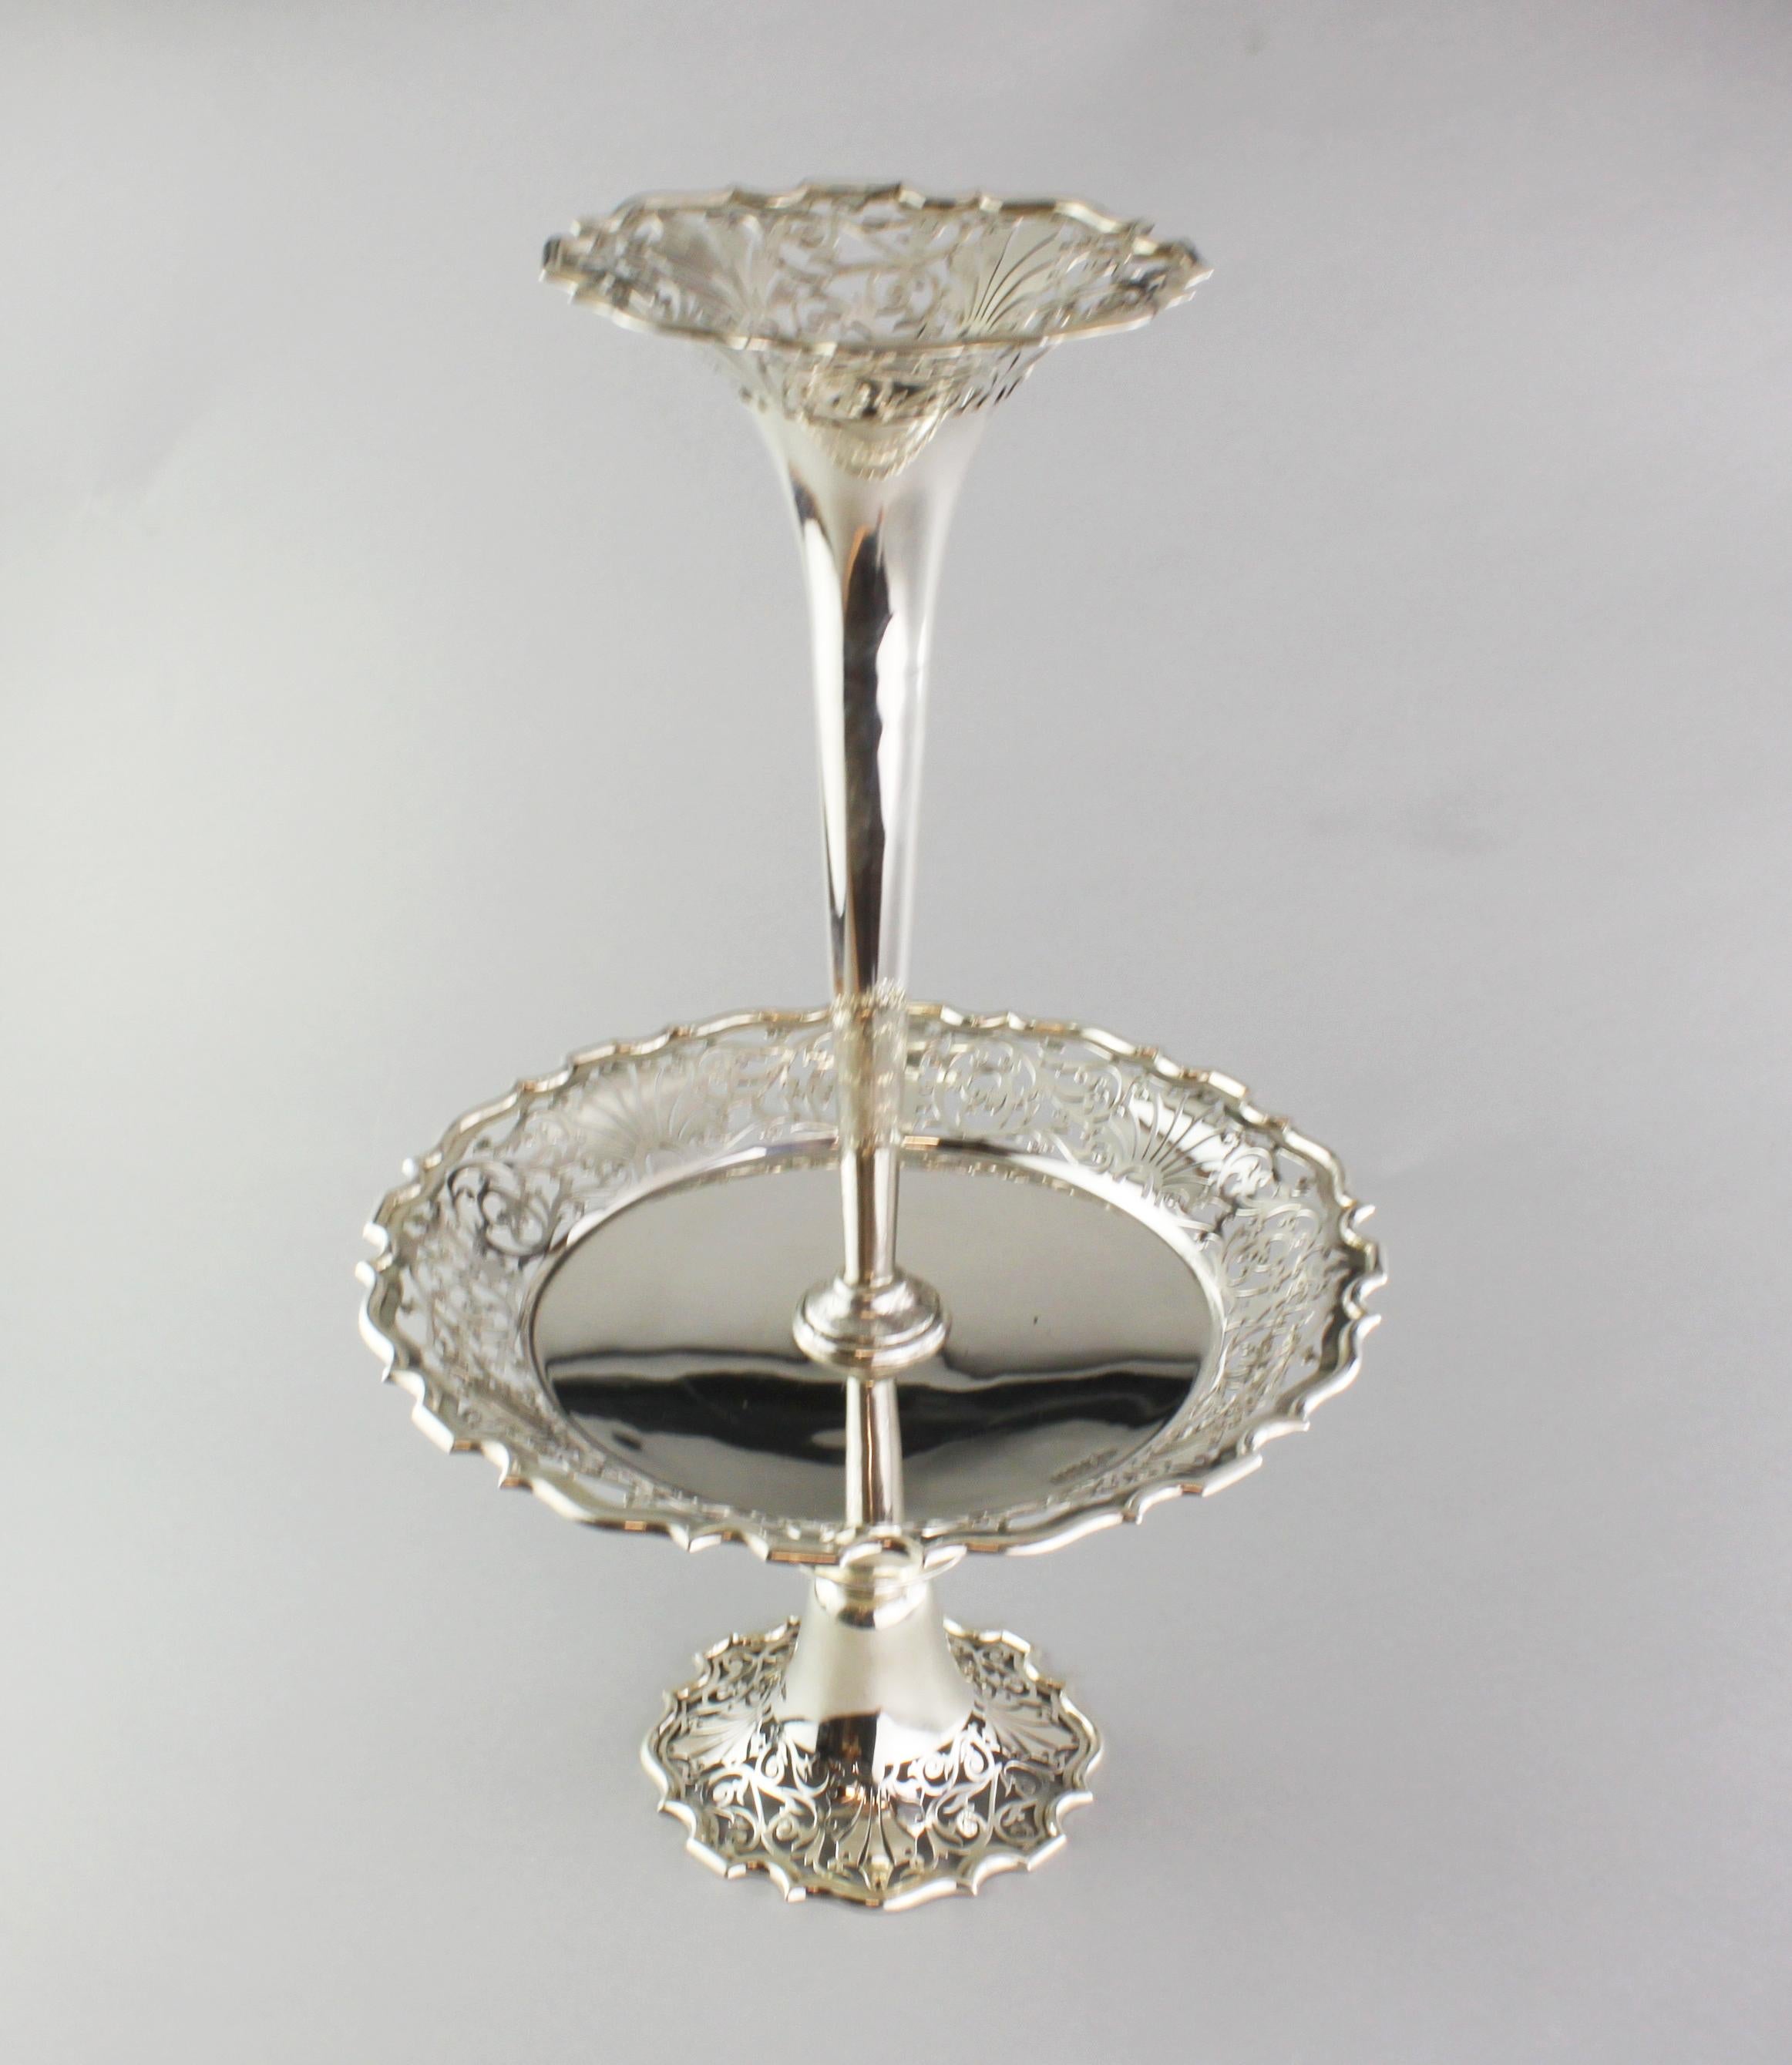 Antique sterling silver tazza dish with vase
Maker: Walker & Hall
Made in Sheffield, 1904
Fully hallmarked.


Size: 25.3 x 41 cm
Weight: 1055 grams

Condition: Minor wear and tear from general usage, excellent overall condition with no